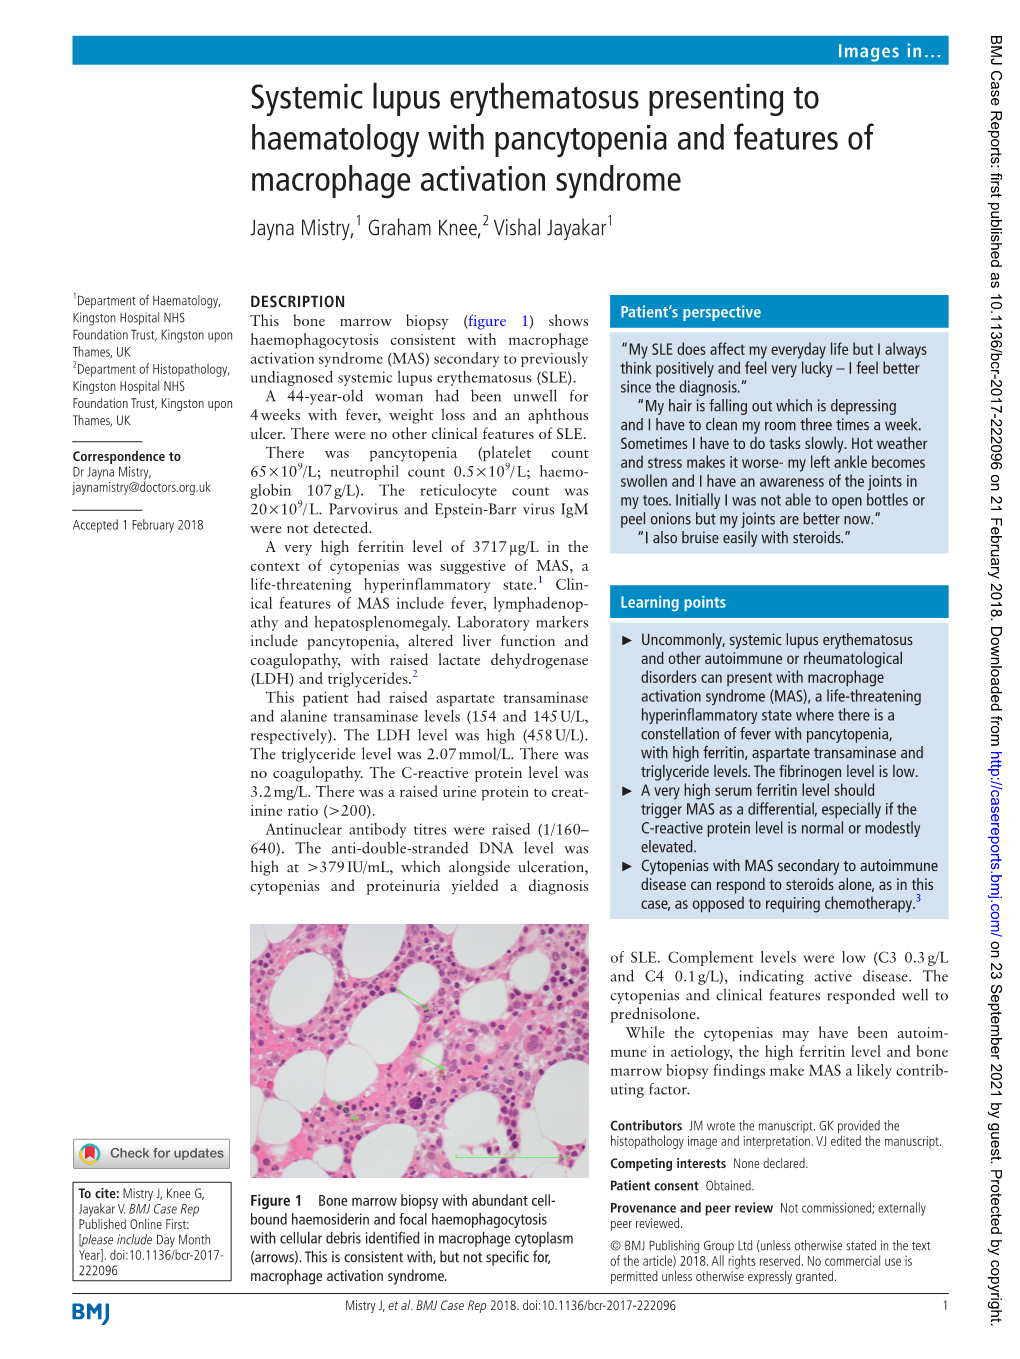 Systemic Lupus Erythematosus Presenting to Haematology with Pancytopenia and Features of Macrophage Activation Syndrome Jayna Mistry,1 Graham Knee,2 Vishal Jayakar1